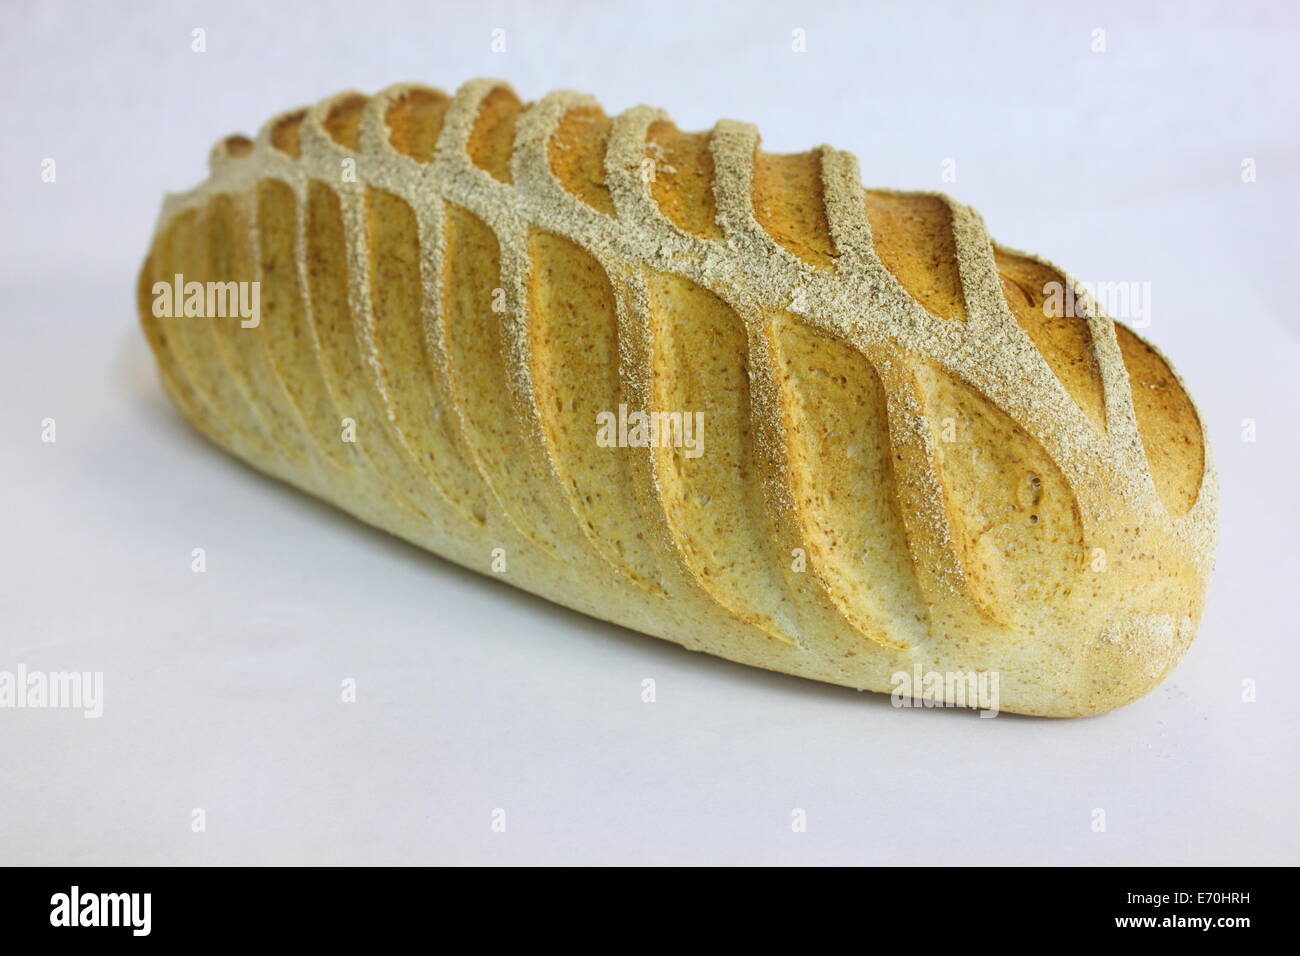 Rye bread baguette with superfine flour on top Stock Photo